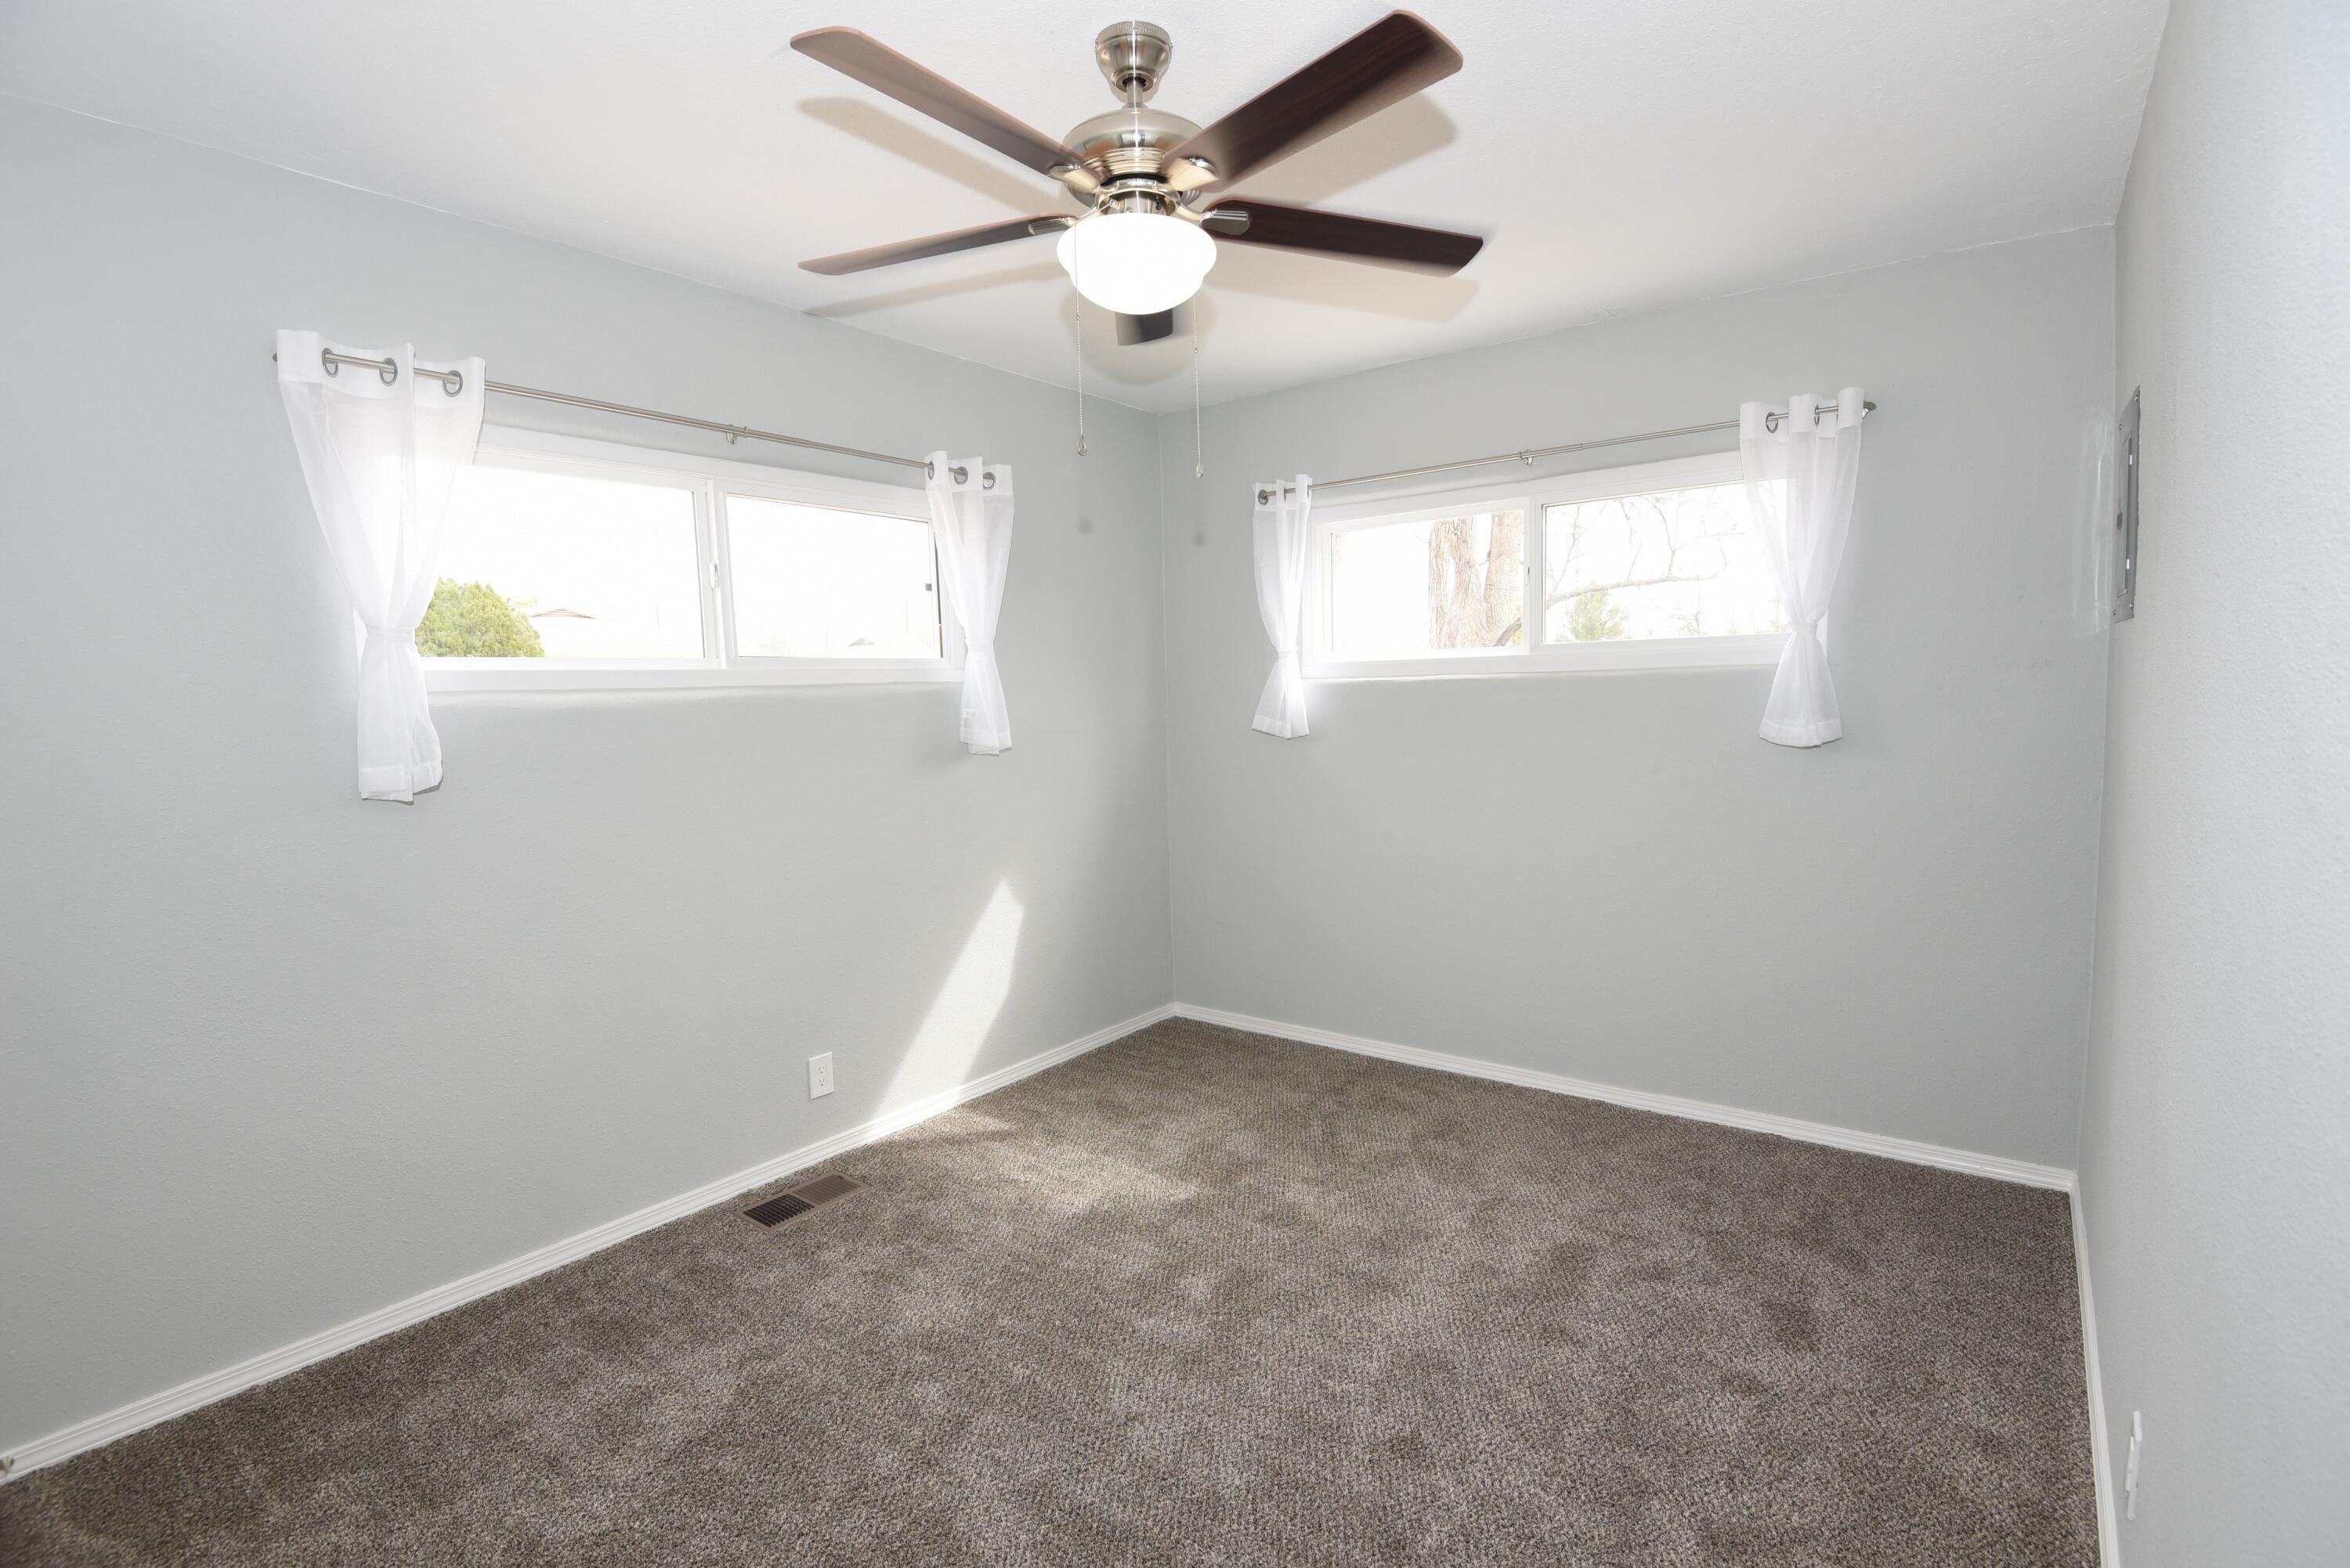 728 Cagua Drive SE, Albuquerque, New Mexico 87108, 3 Bedrooms Bedrooms, ,1 BathroomBathrooms,Residential,For Sale,728 Cagua Drive SE,1058395